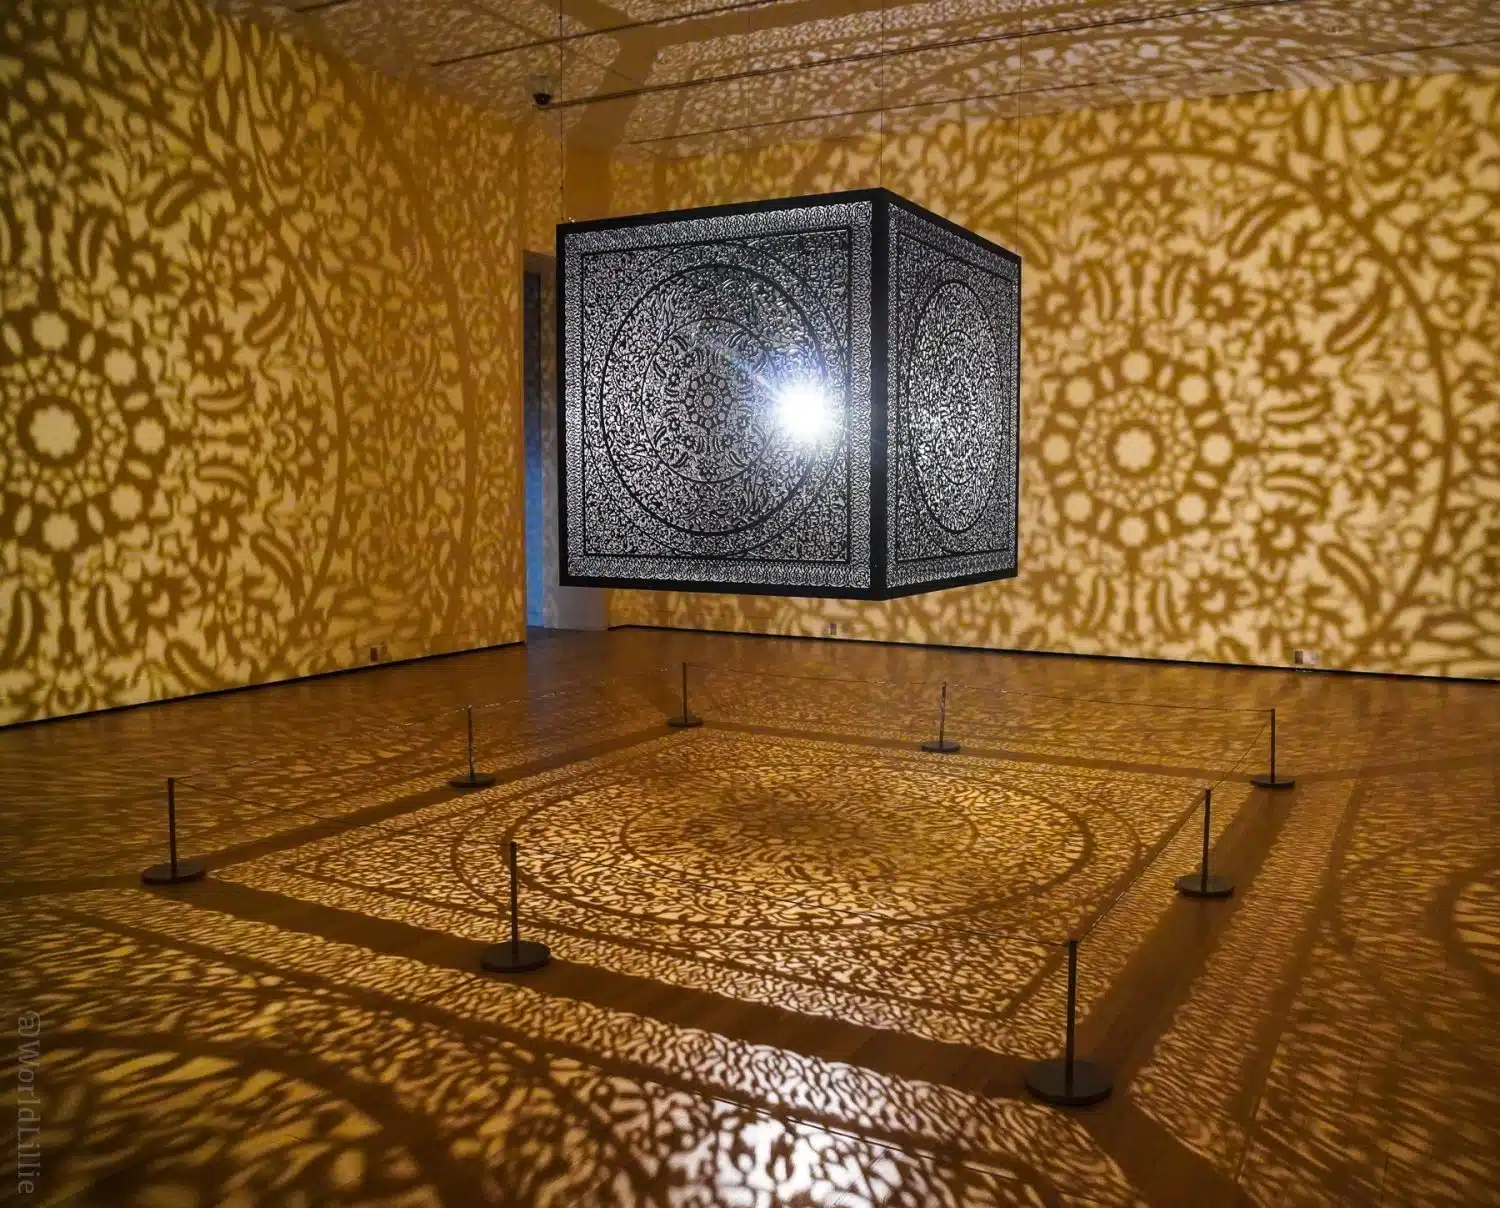  "All the Flowers Are for Me," 2016, by Anila Quayyam Agha!